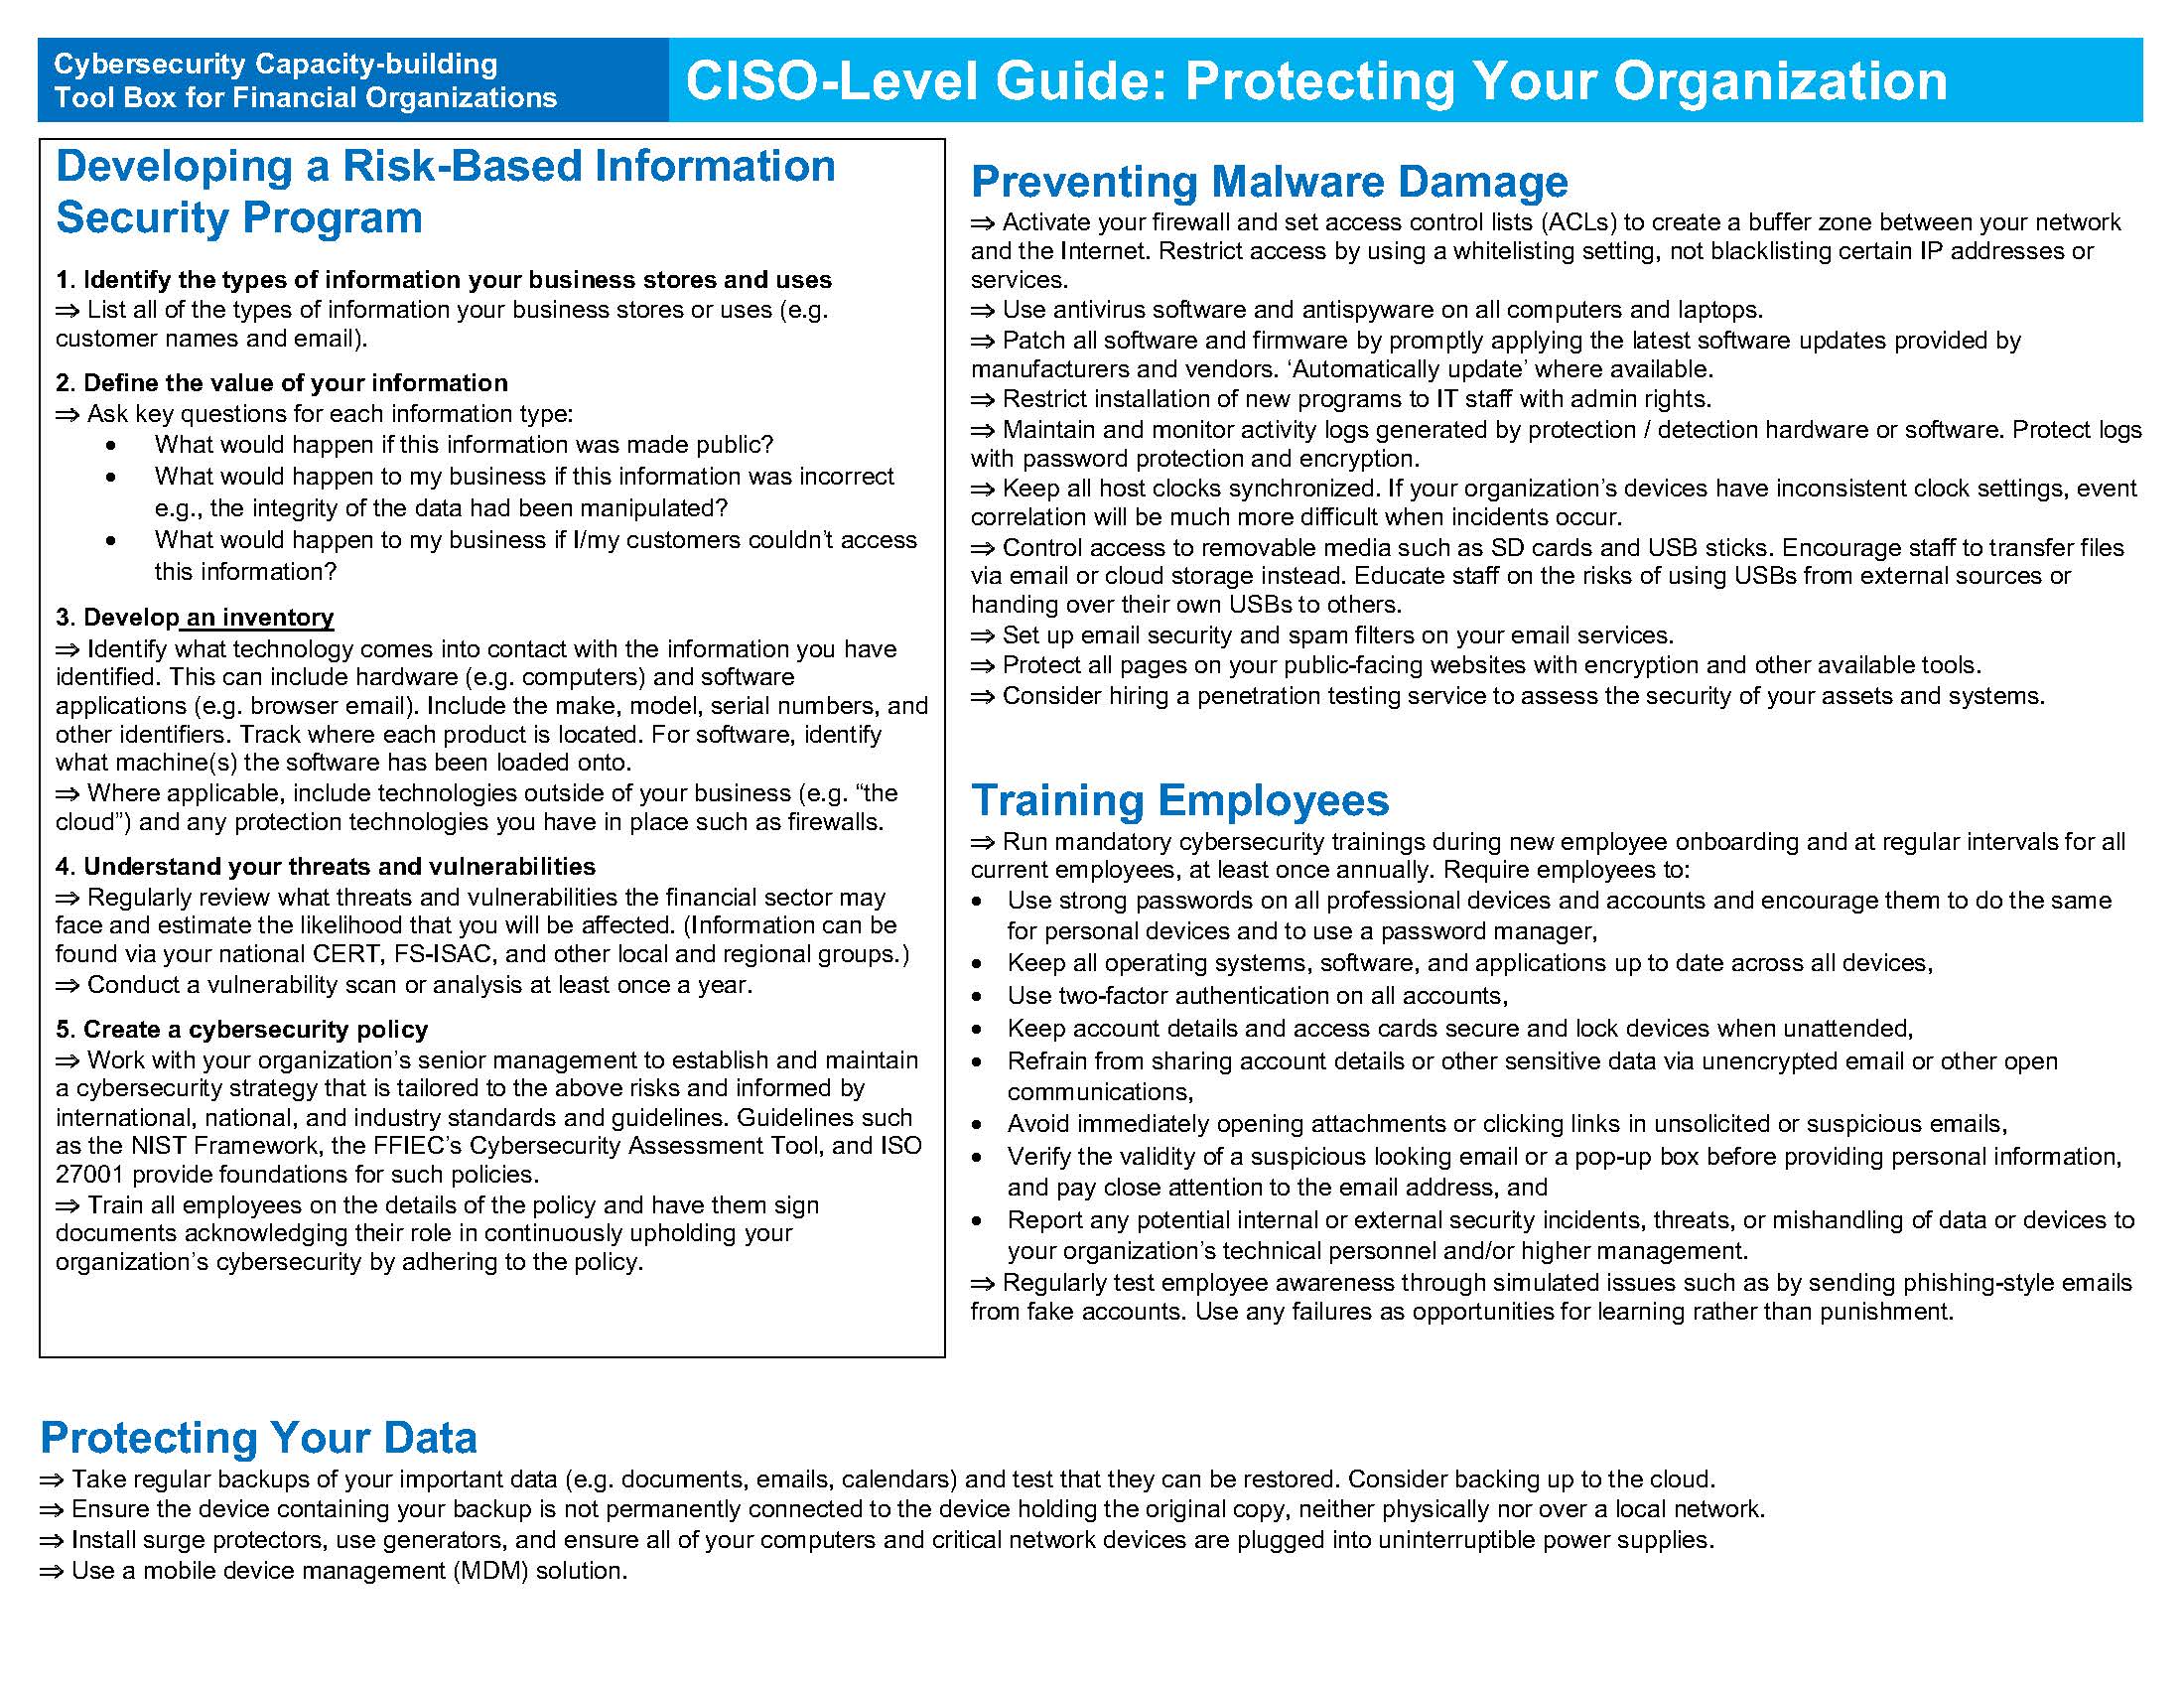 image of the CISO-Level Guide for protecting the organization